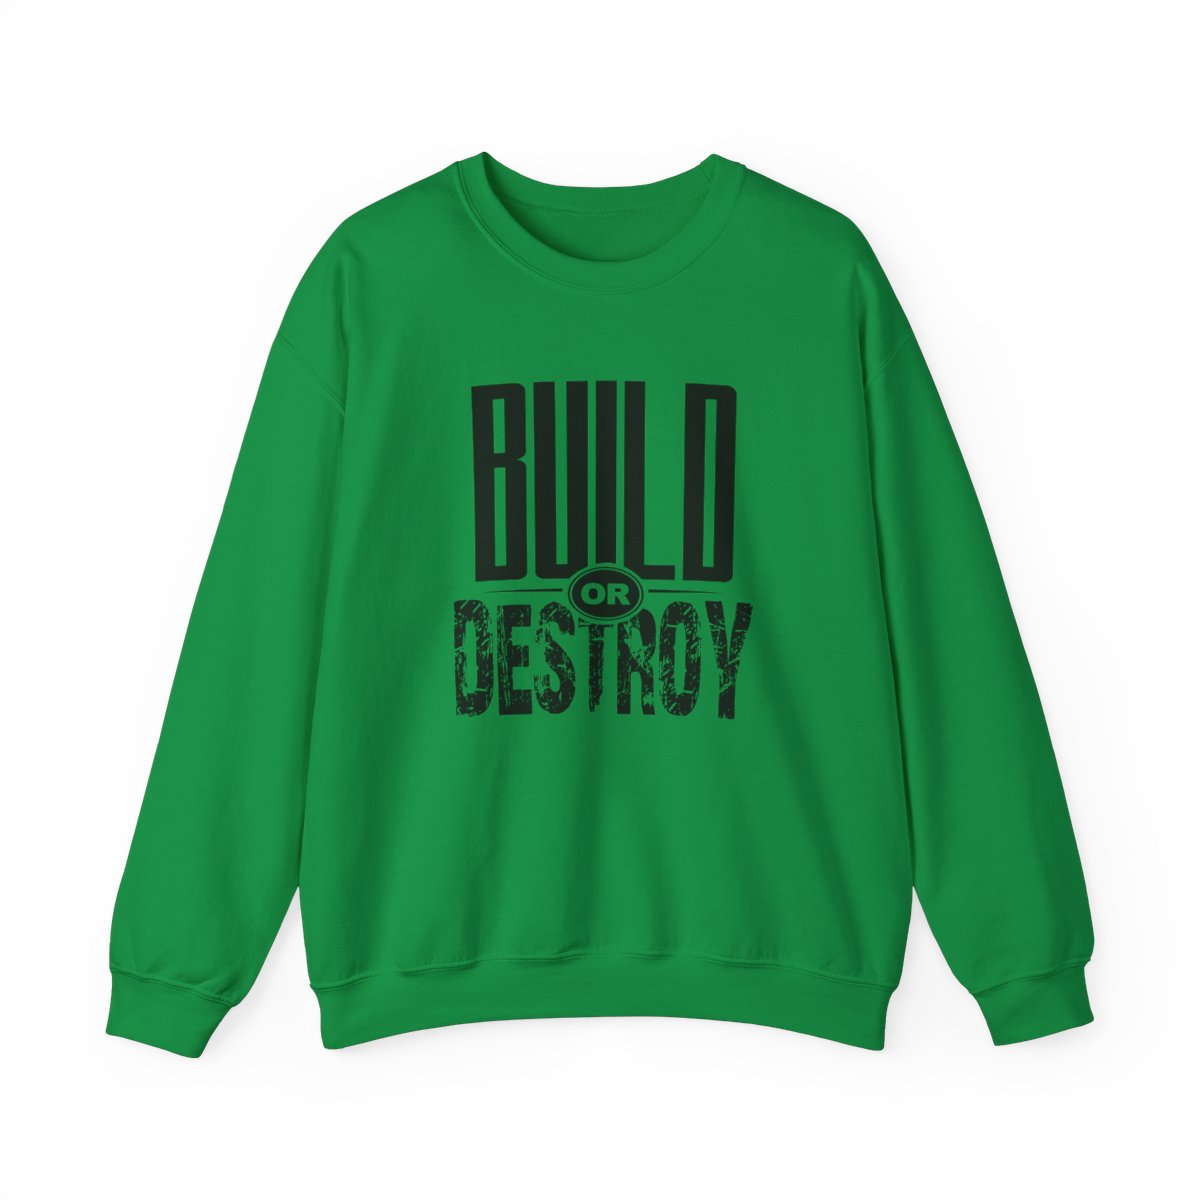 A green sweatshirt with the words " build or destroy ".